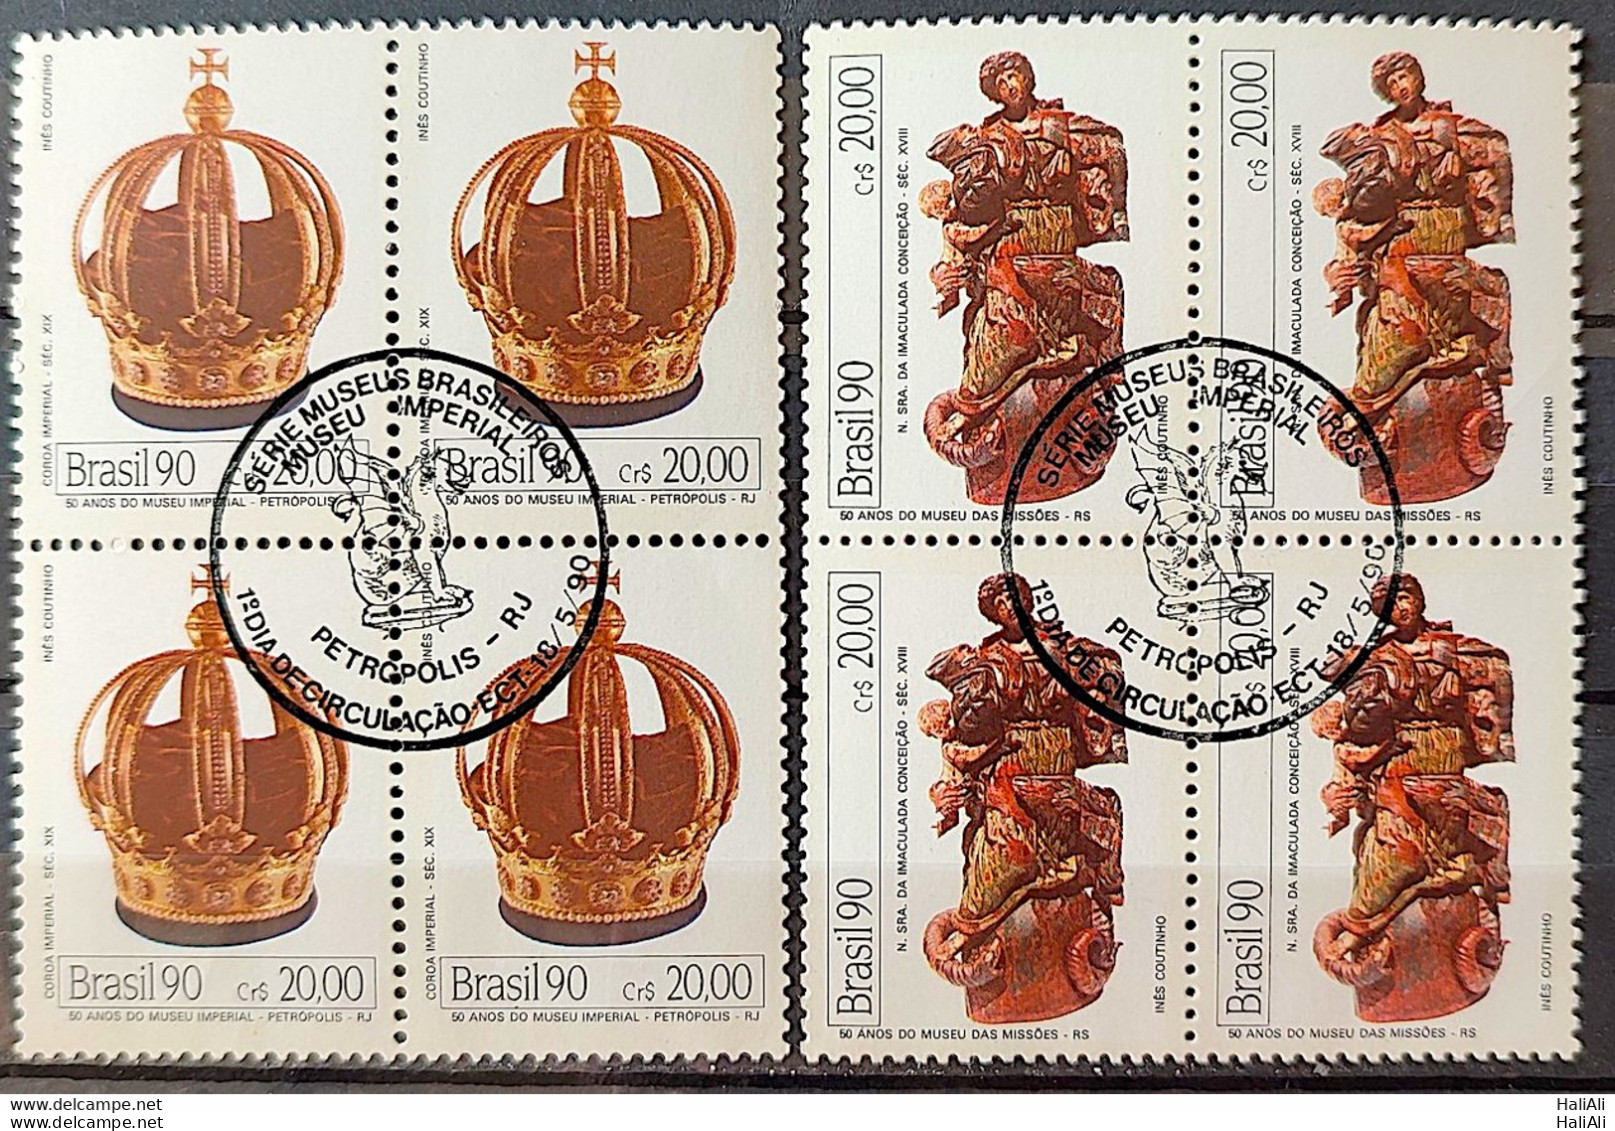 C 1683 Brazil Stamp 50 Year Imperial Museum Of Missions History 1990 Block Of 4 CBC RJ Complete Series - Unused Stamps